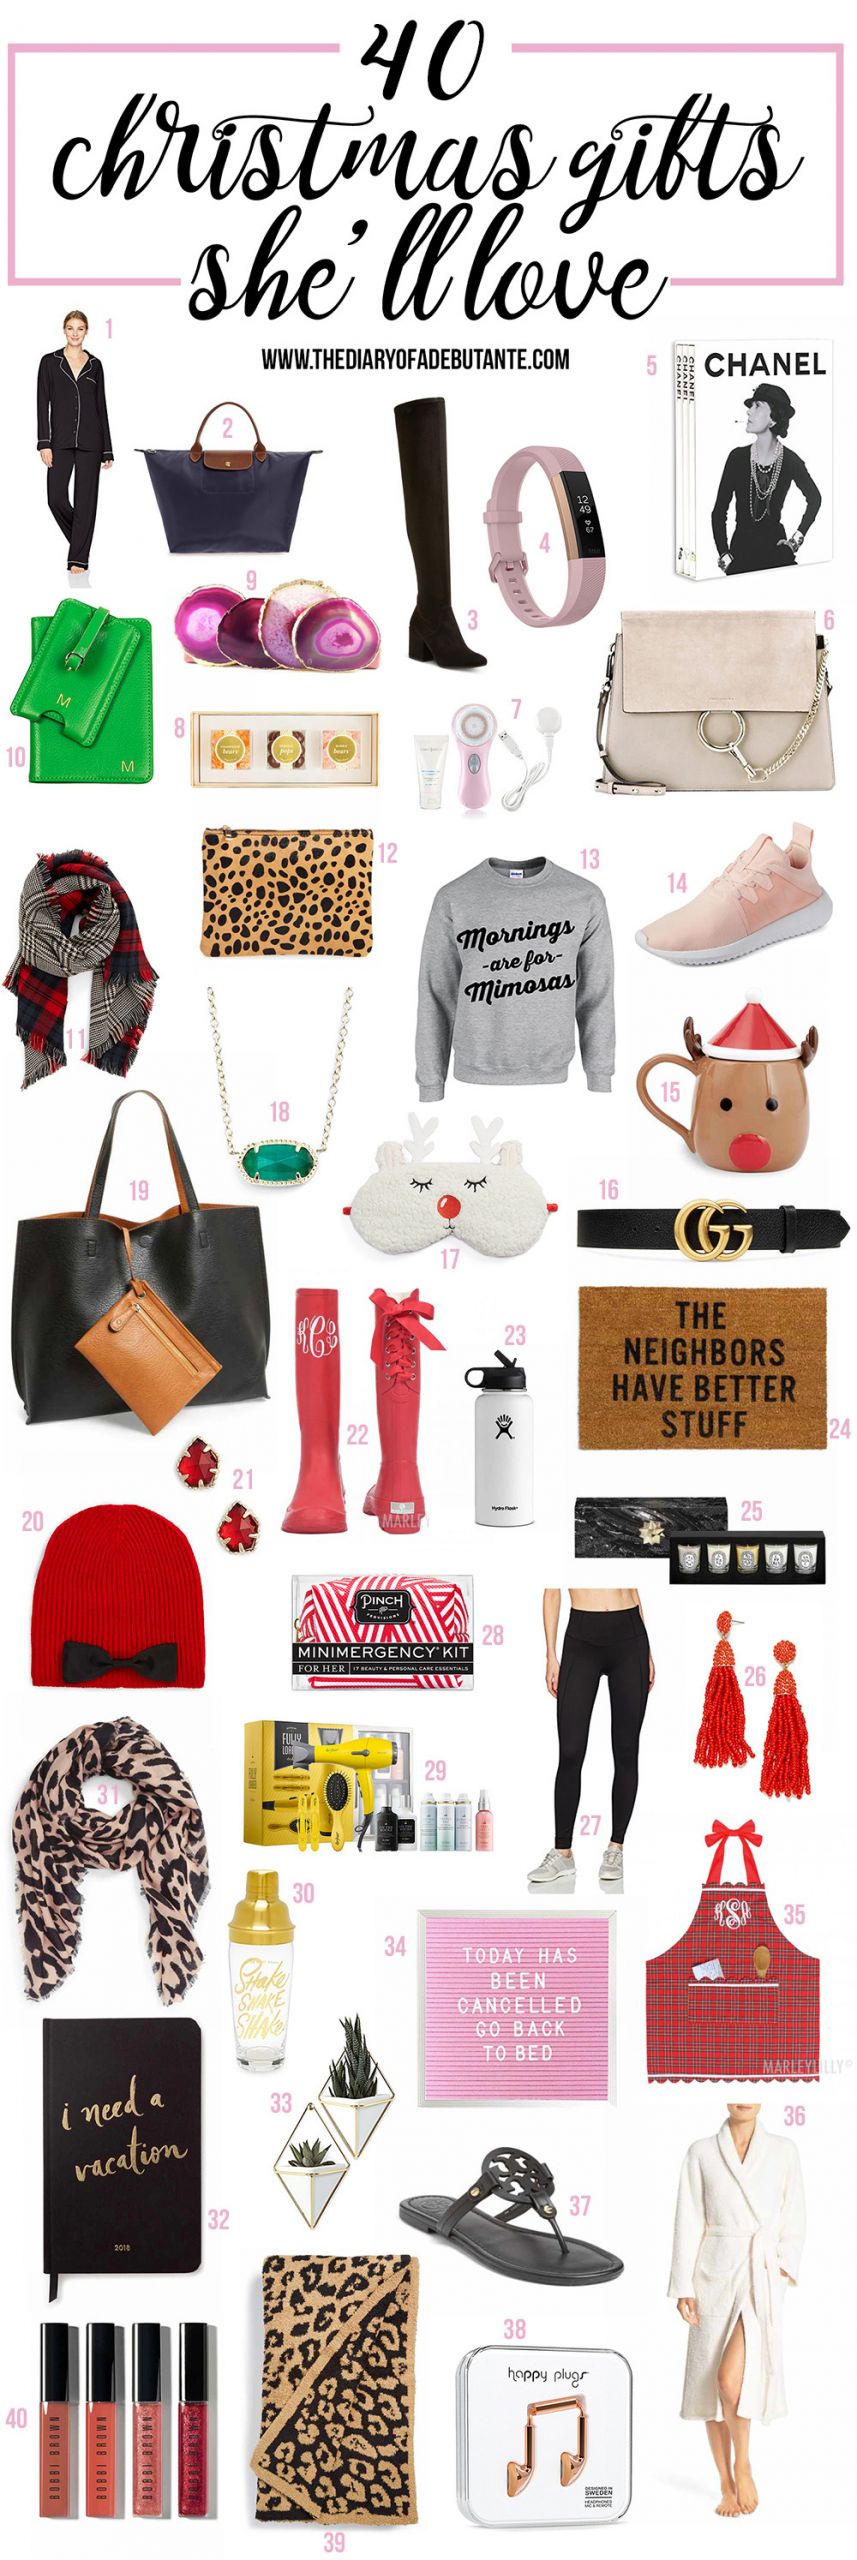 Holiday Gift Ideas For Girlfriend
 Cool Gift Ideas for Girlfriend Mom or BFF this Holiday